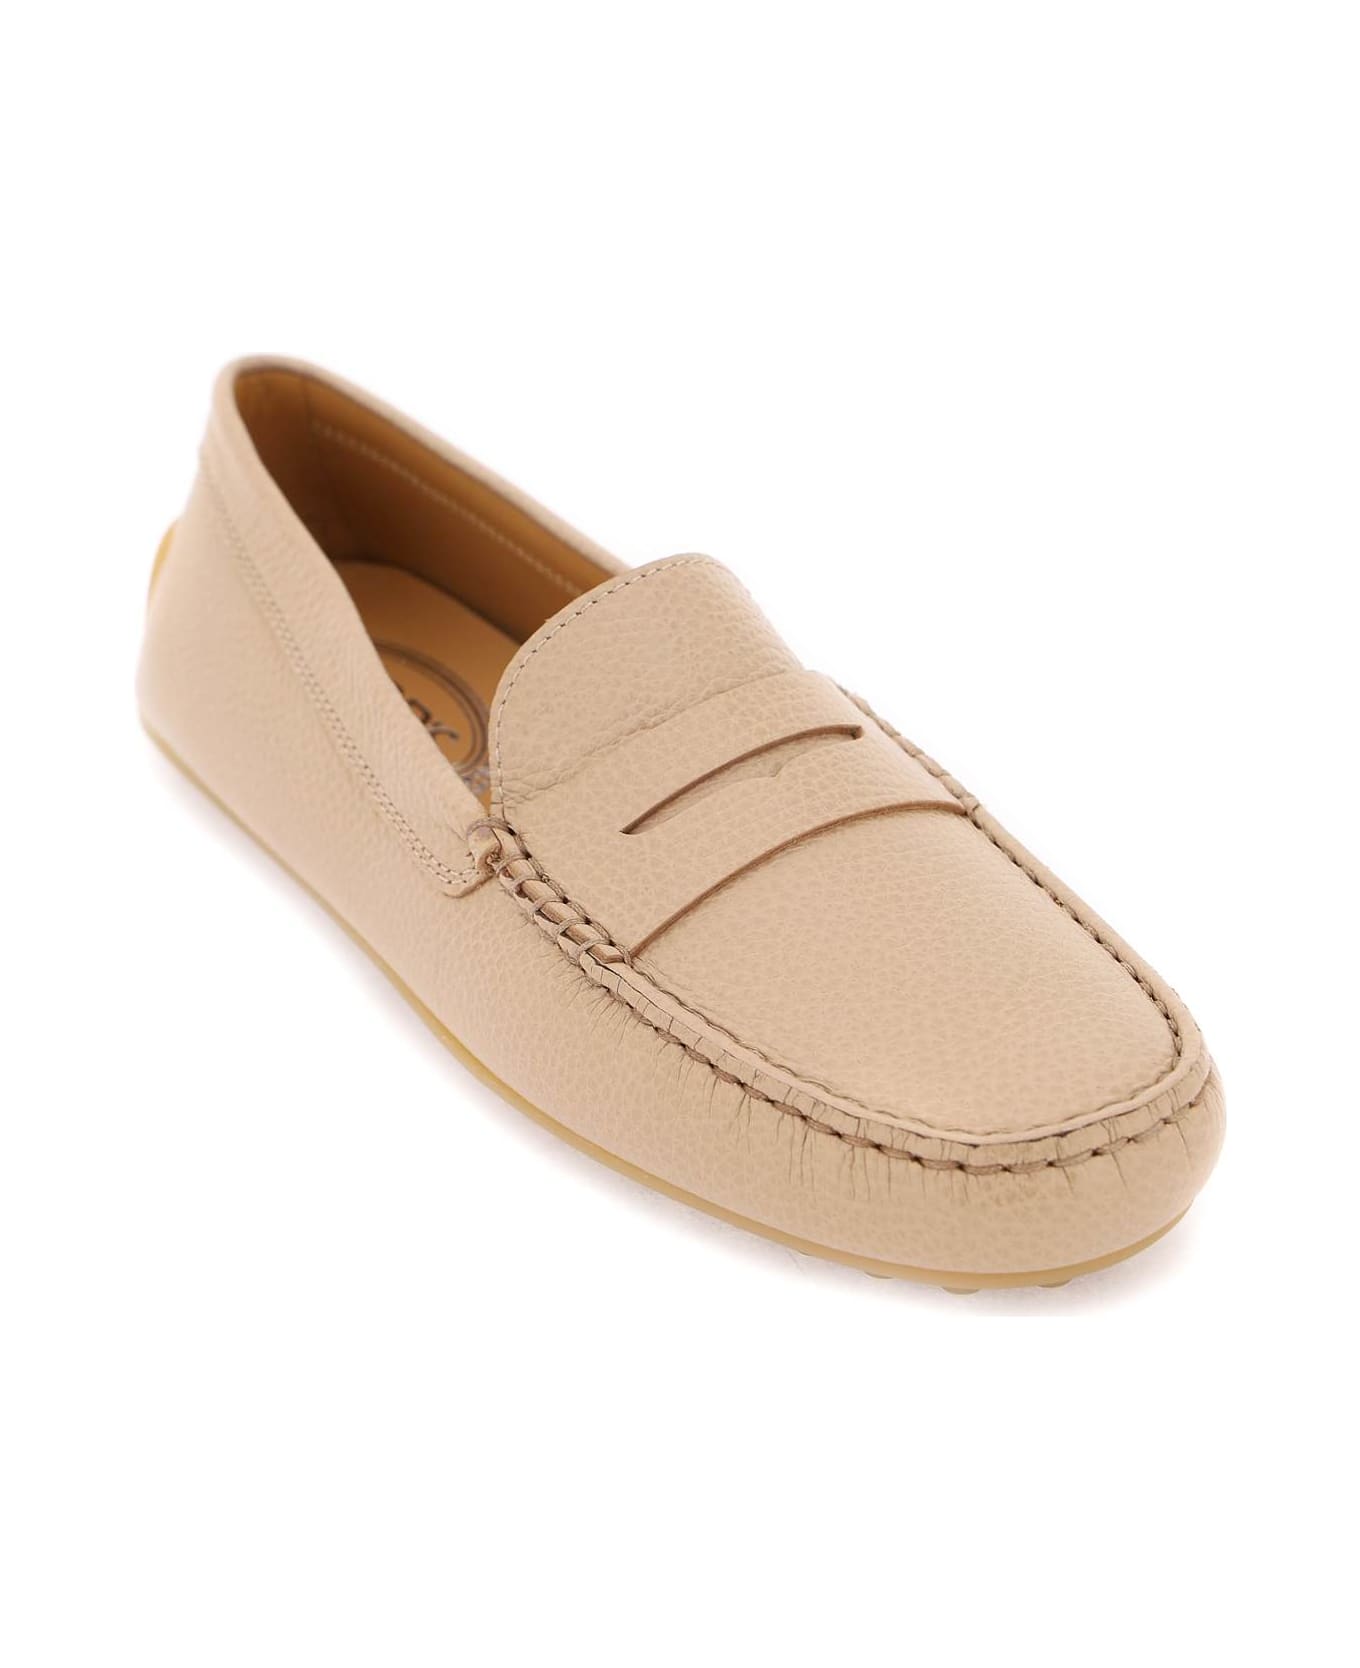 Tod's City Gommino Leather Loafers - ROSA GRANITO フラットシューズ